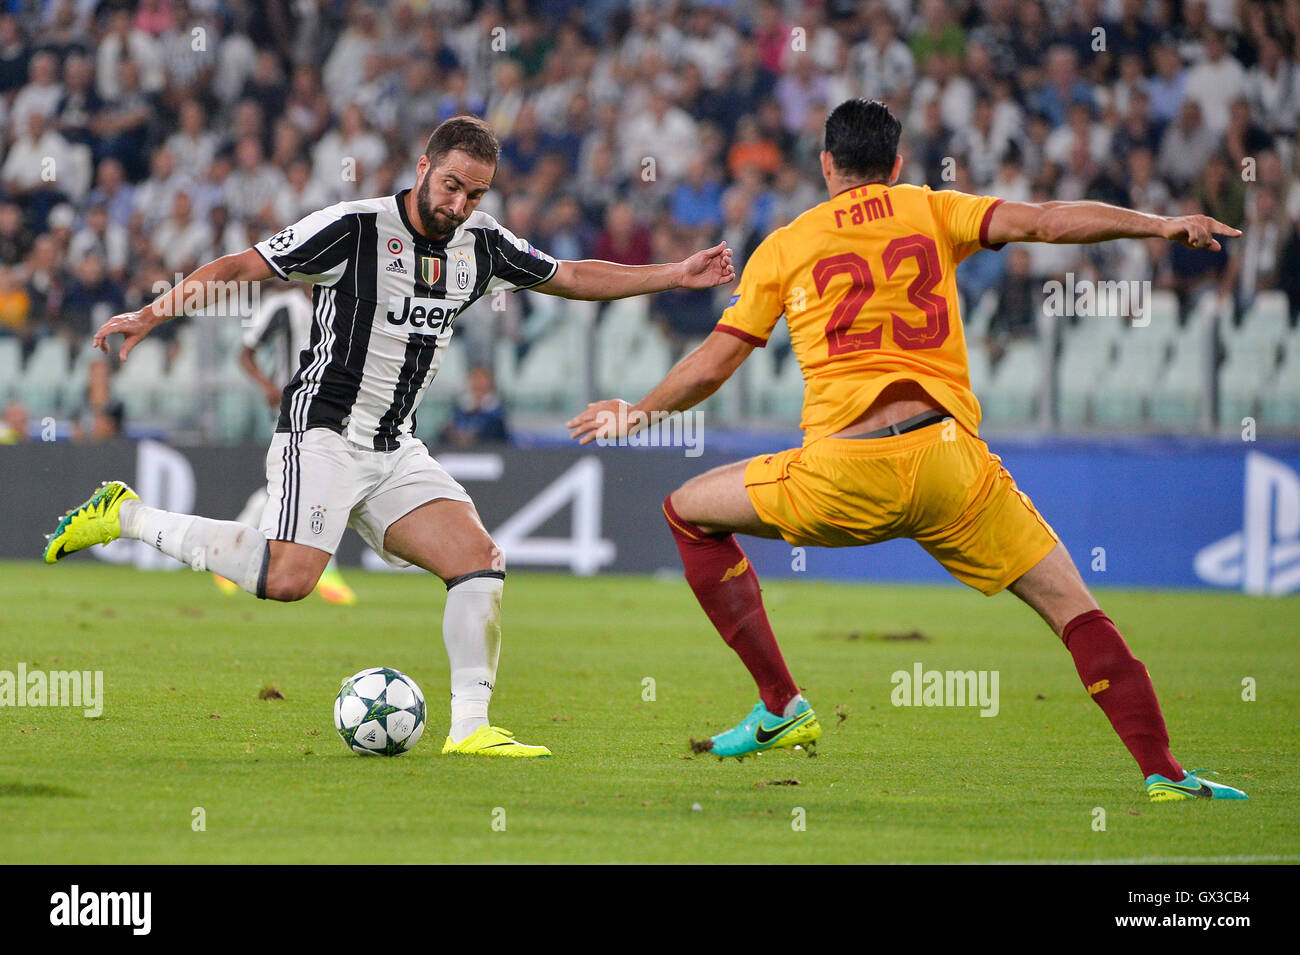 Turin, Italy. 14th Sep, 2016. Gonzalo Higuain (L) of Juventus vies with Adil Rami of Sevilla during the UEFA Champions League soccer match in Turin, Italy, Sept. 14, 2016. © Alberto Lingria/Xinhua/Alamy Live News Stock Photo